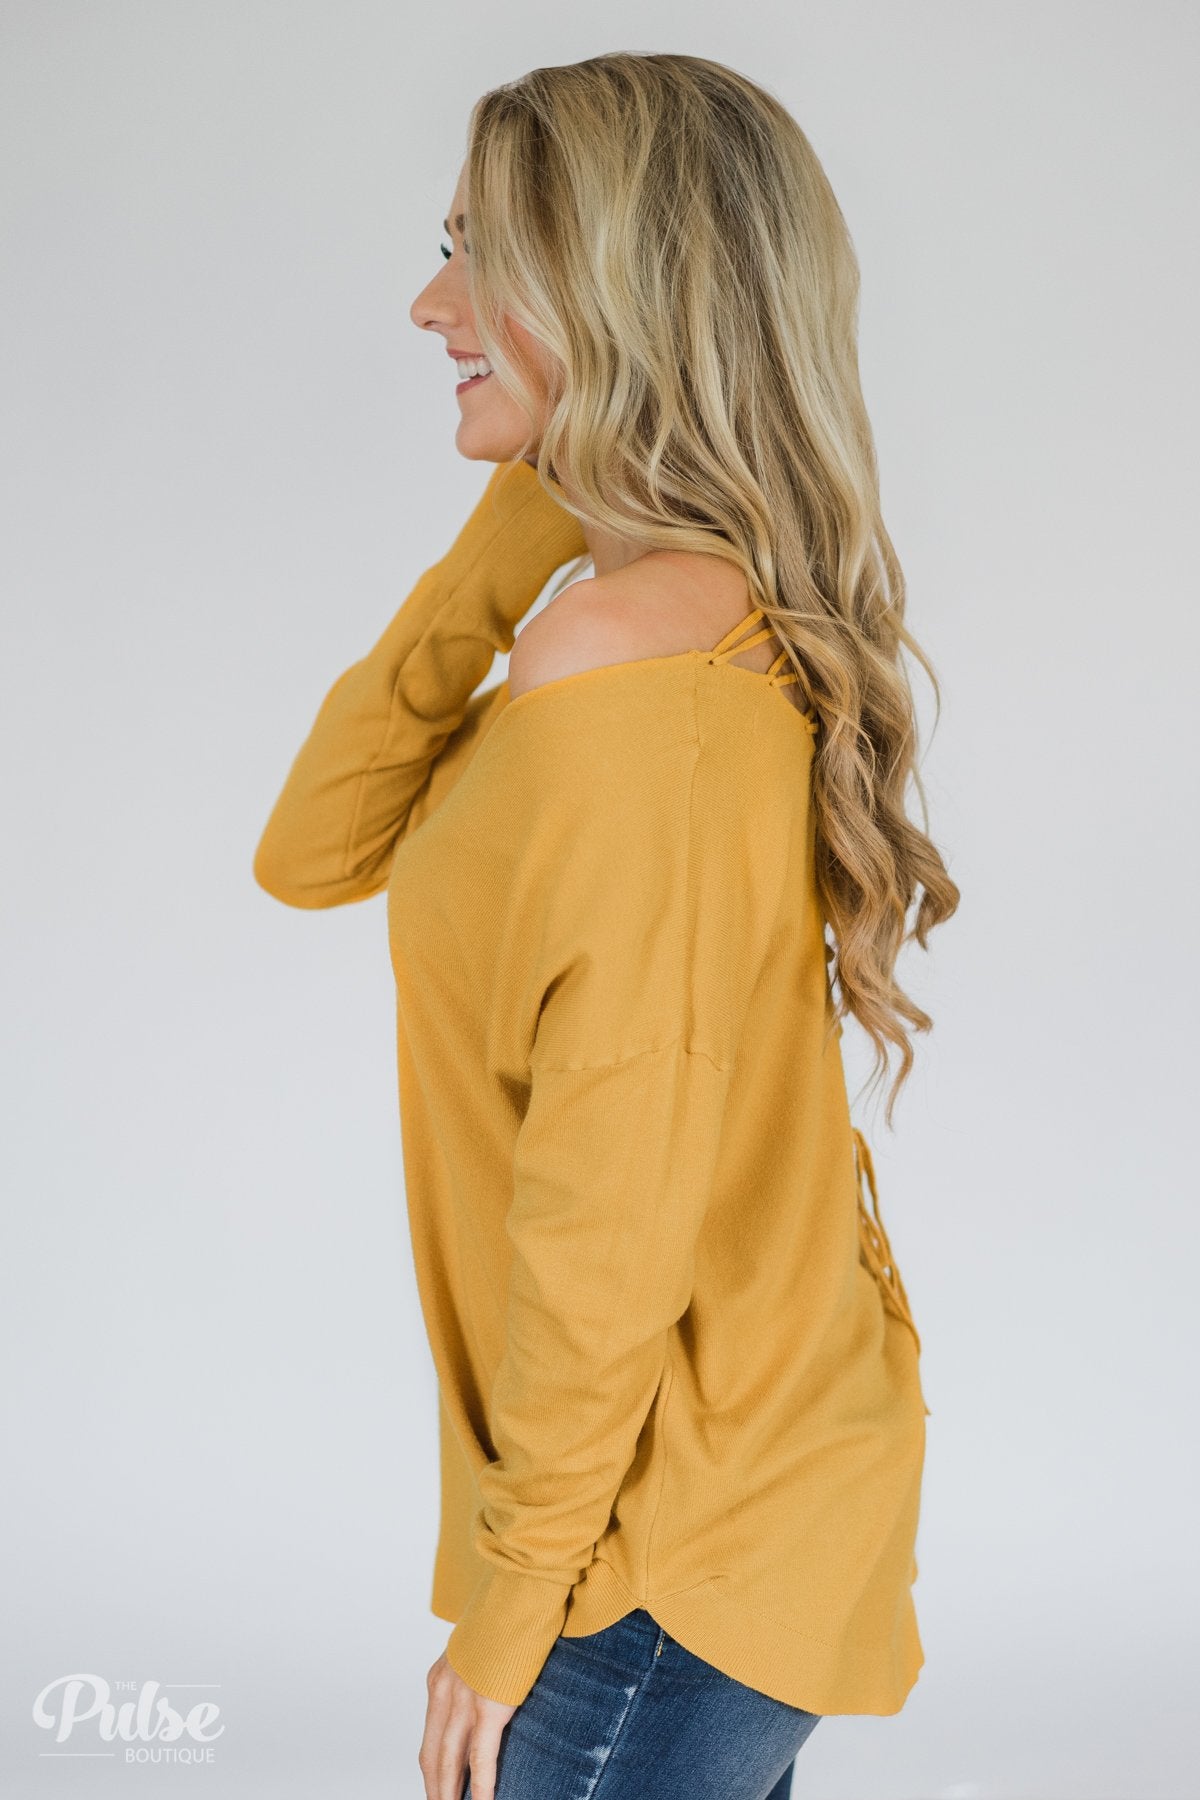 Soft Bliss Lace Down Back Sweater- Honey Yellow